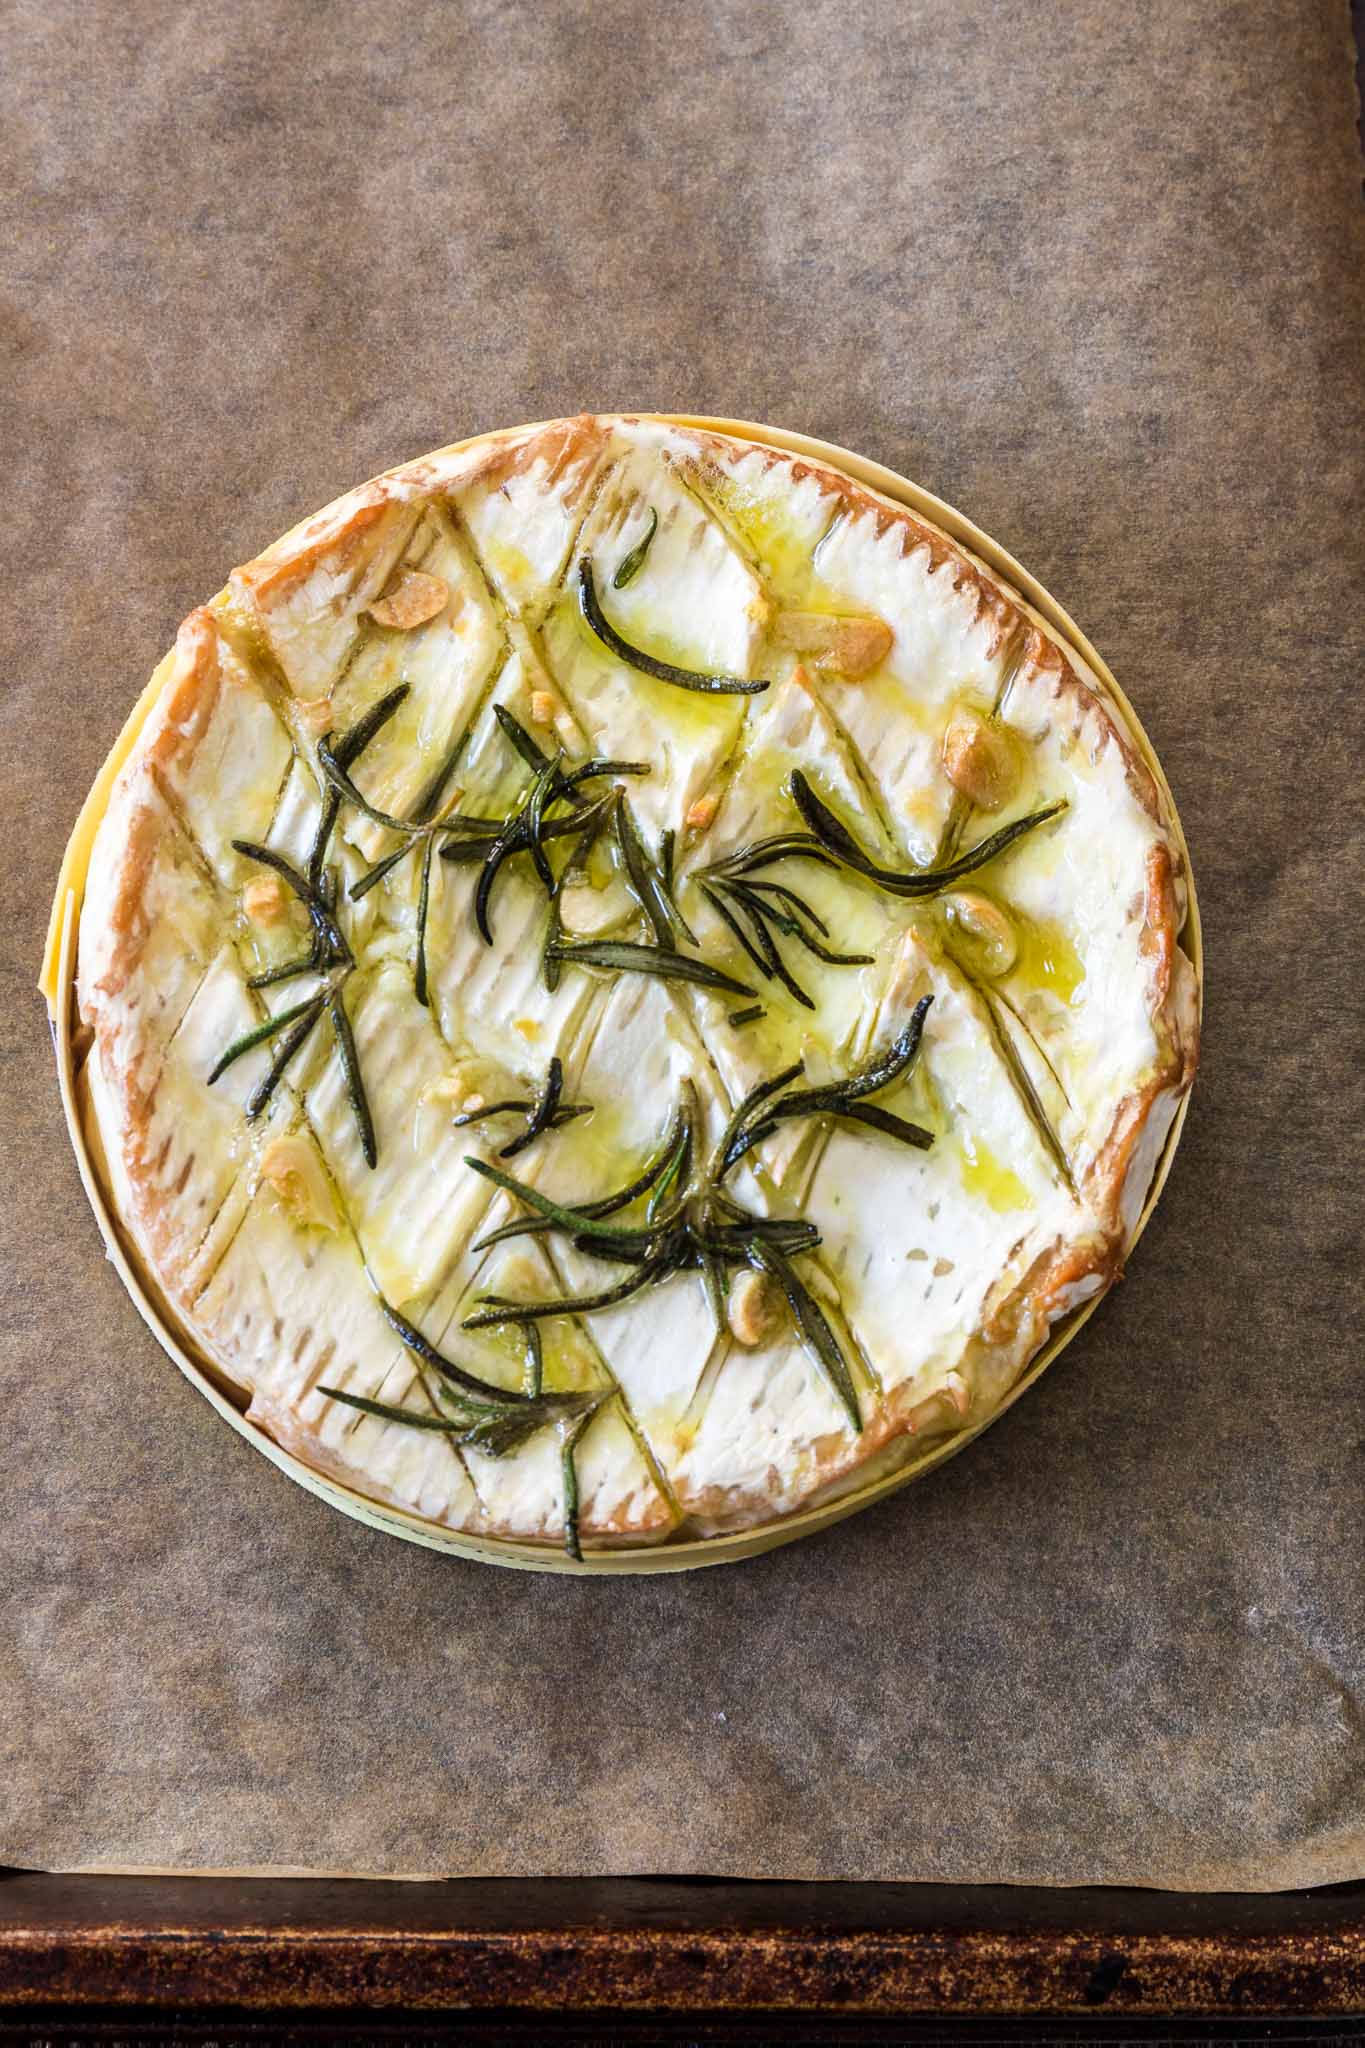 Baked Camembert with Garlic and Rosemary | www.oliviascuisine.com | A gooey and fragrant Baked Camembert is always a must at my dinner parties. This version with garlic and rosemary is one of my favorites and pairs greatly with a glass of bubbly!